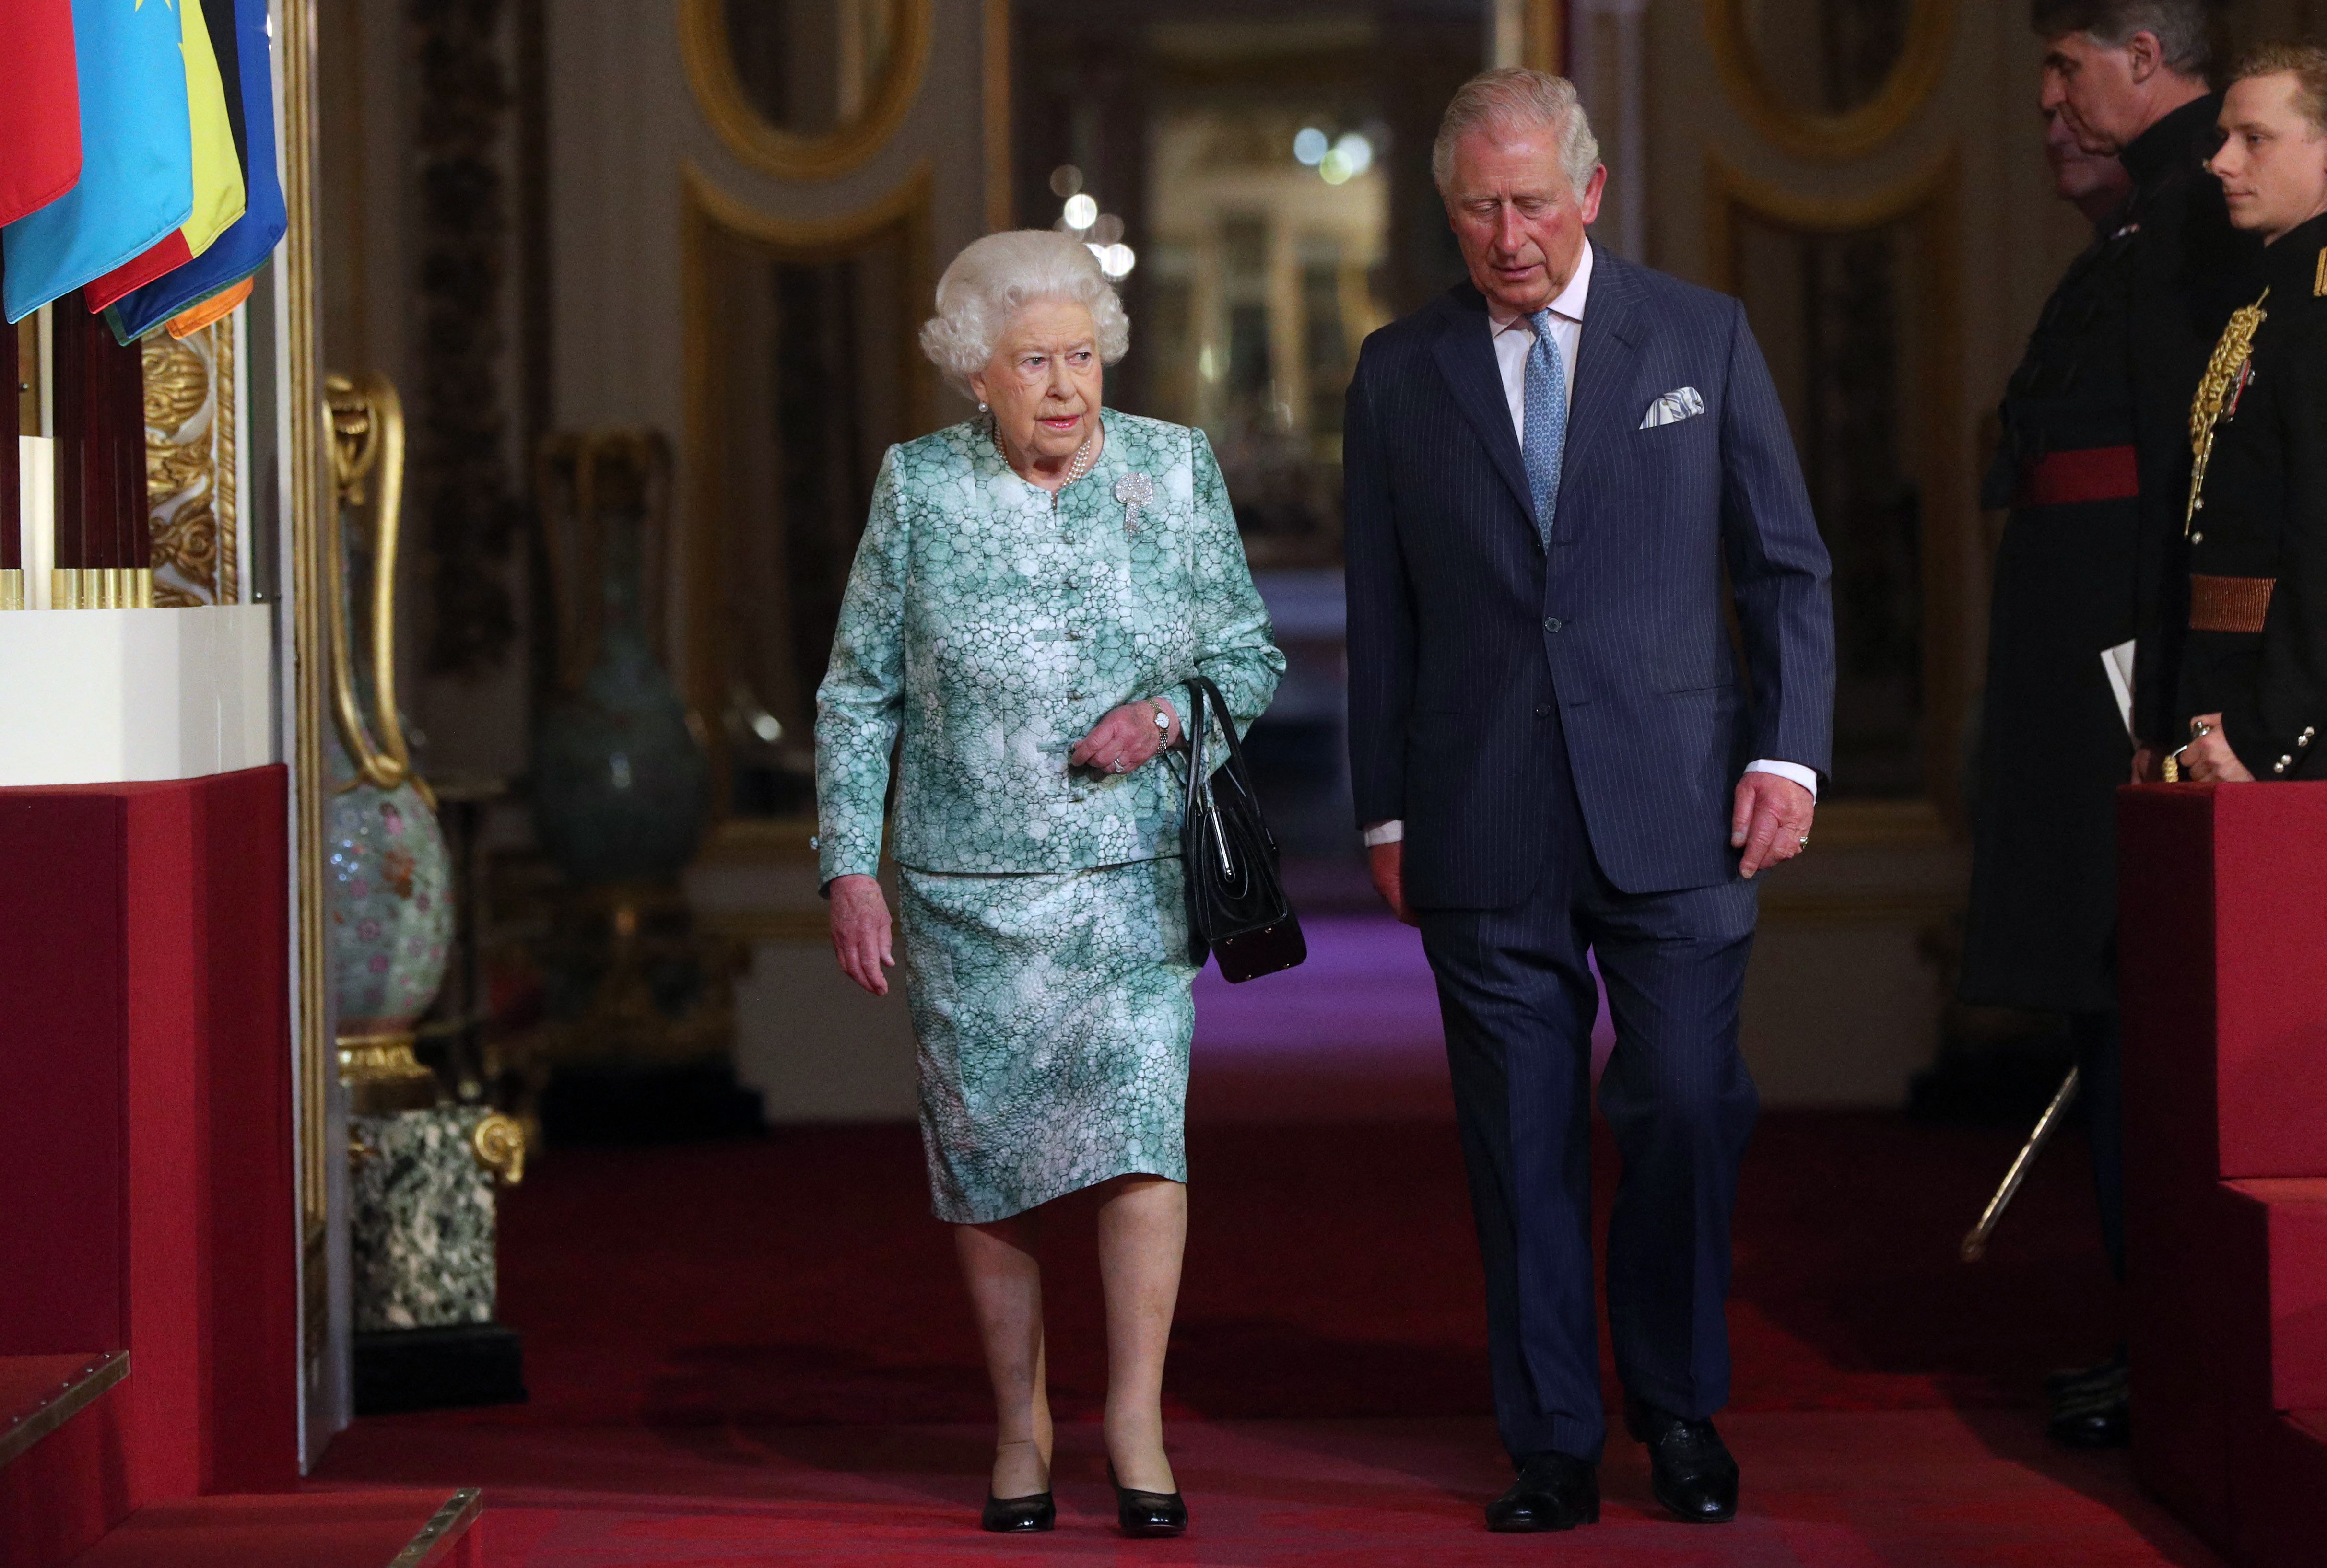 Queen Elizabeth II and King Charles III arrive for the formal opening of the Commonwealth Heads of Government Meeting (CHOGM) in the ballroom at Buckingham Palace in London on April 19, 2018. | Source: Getty Images